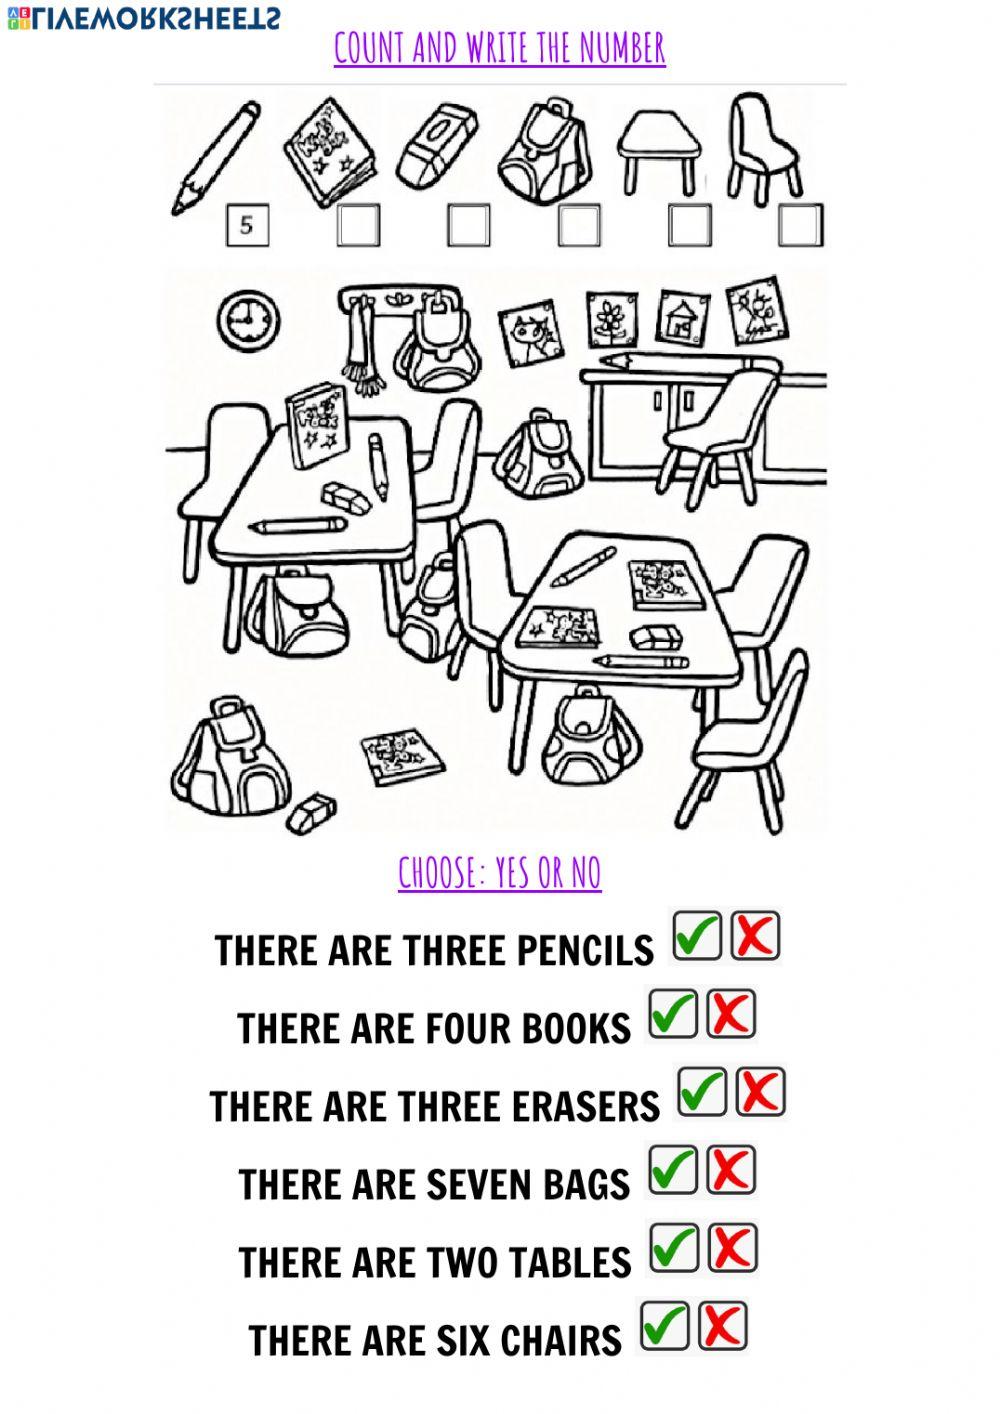 School objects and numbers